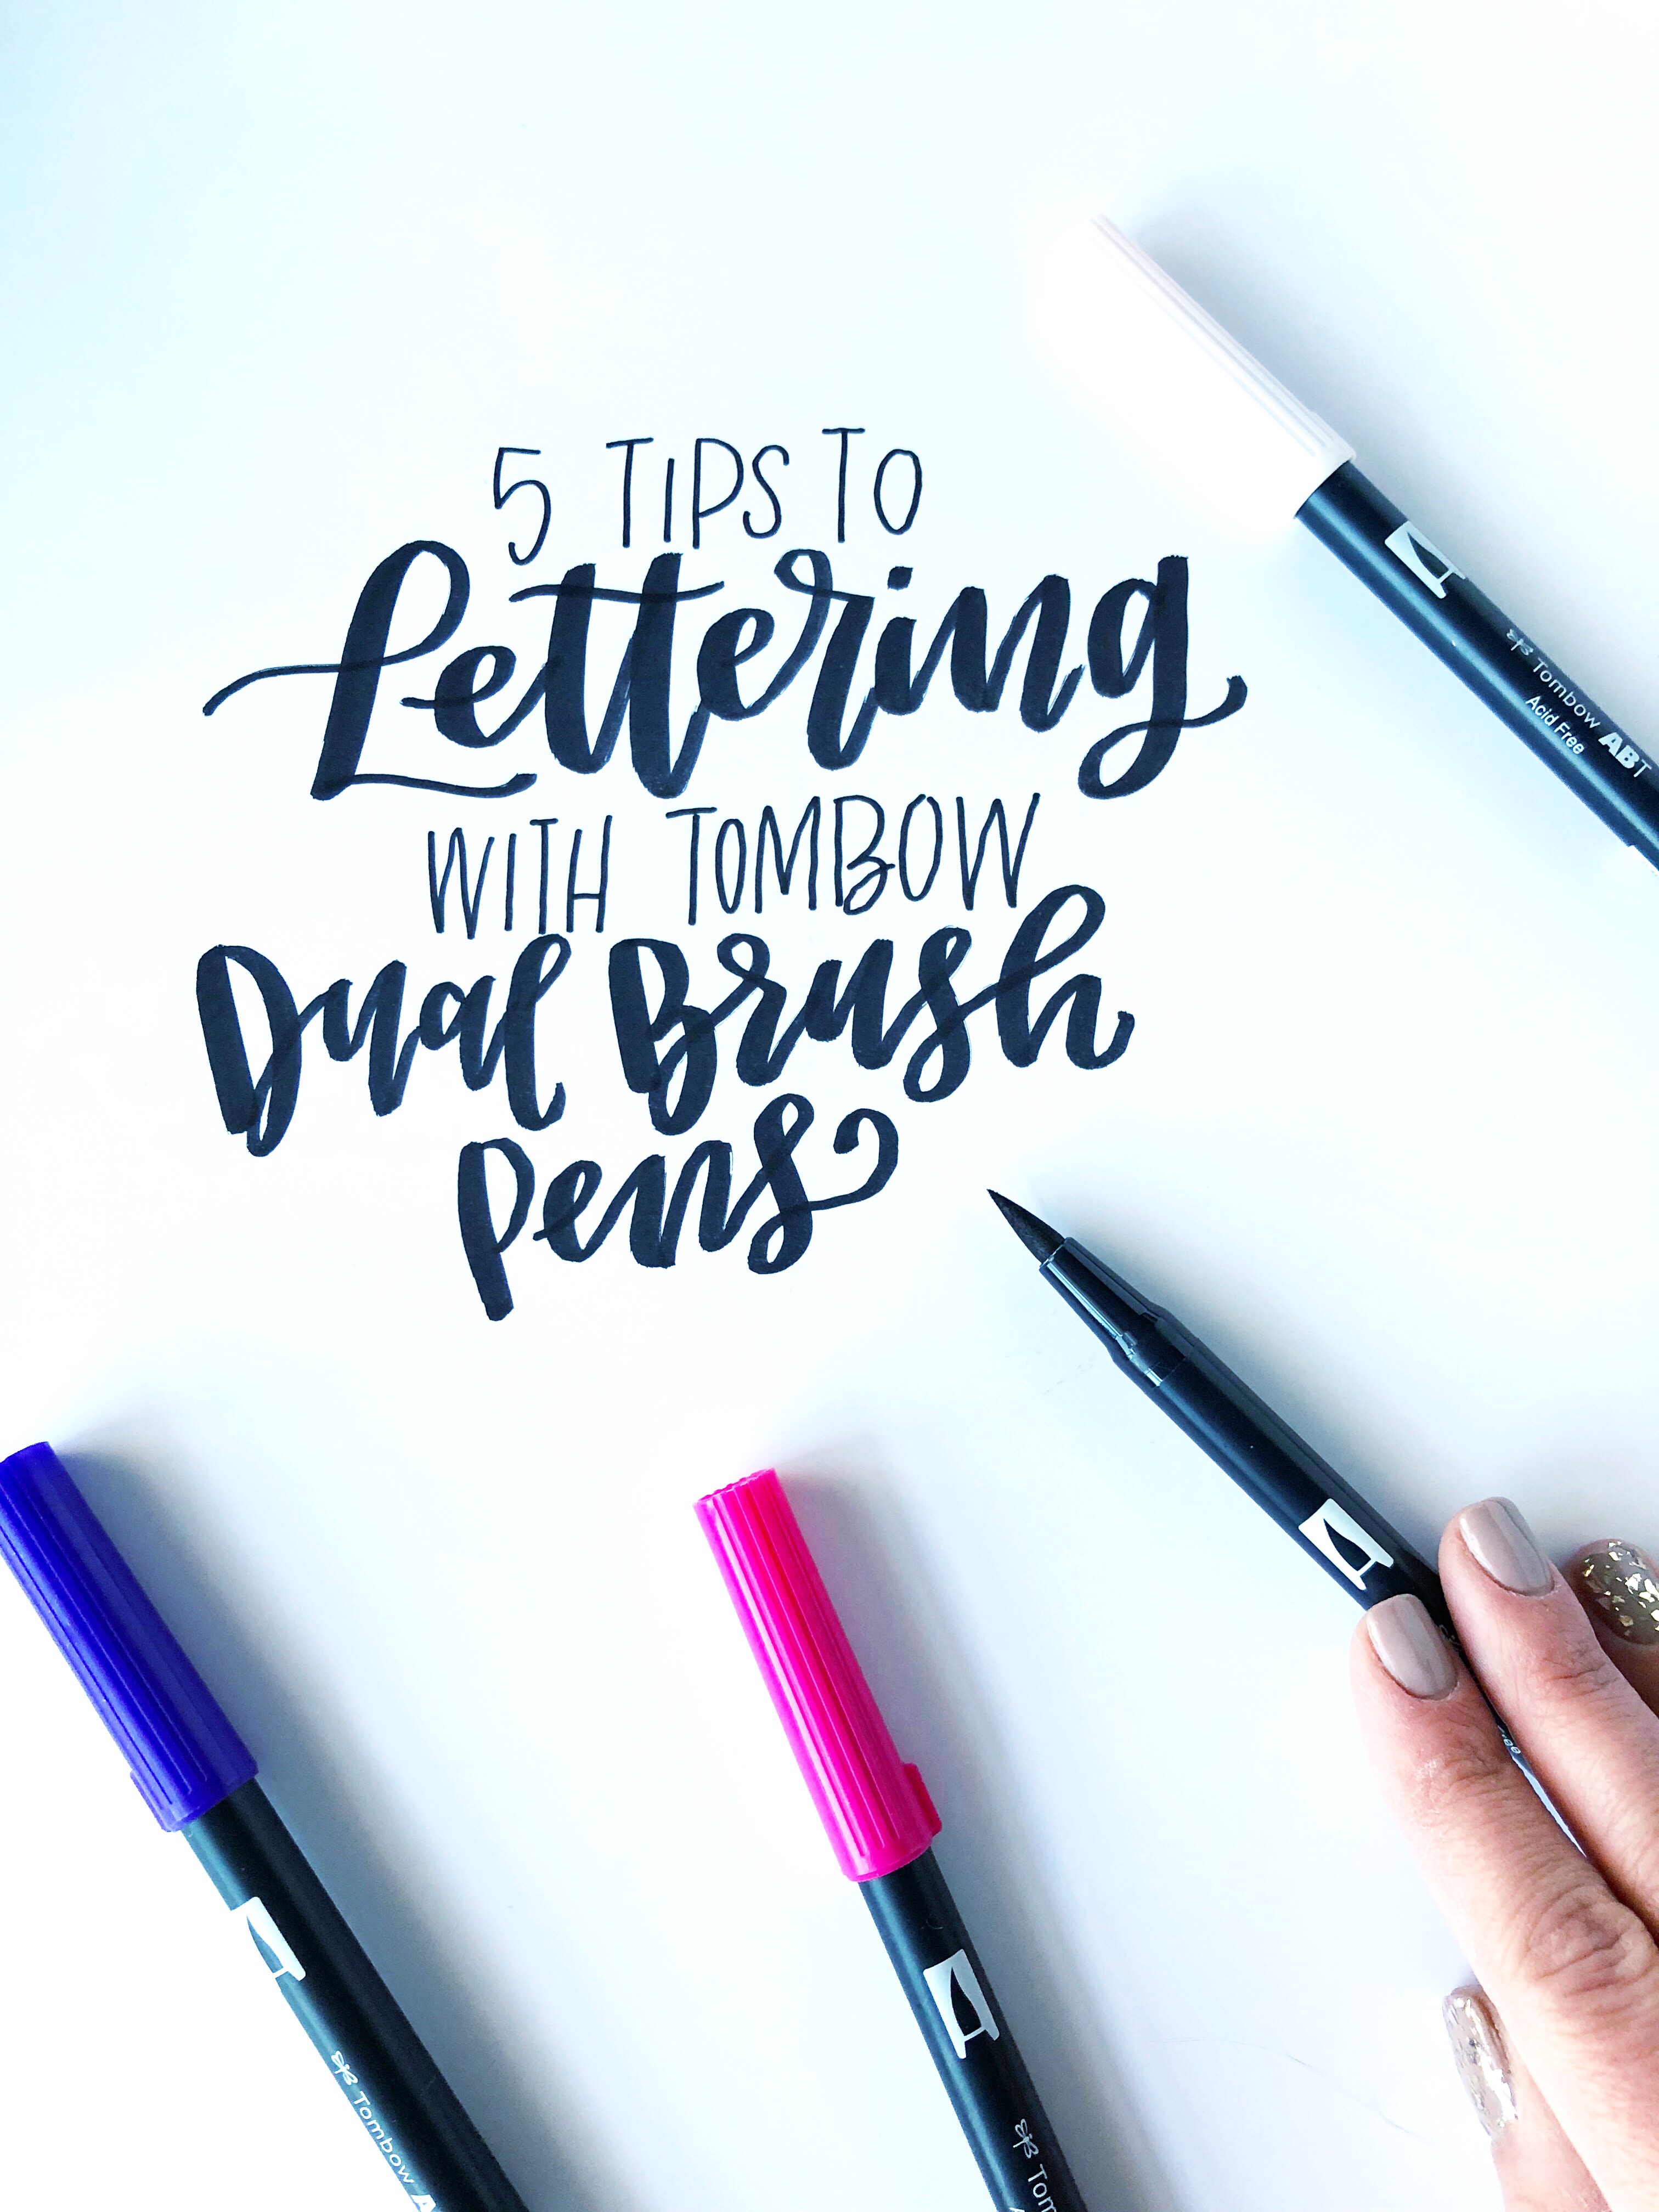 18 Tips to Lettering with Tombow Dual Brush Pens - Tombow USA Blog